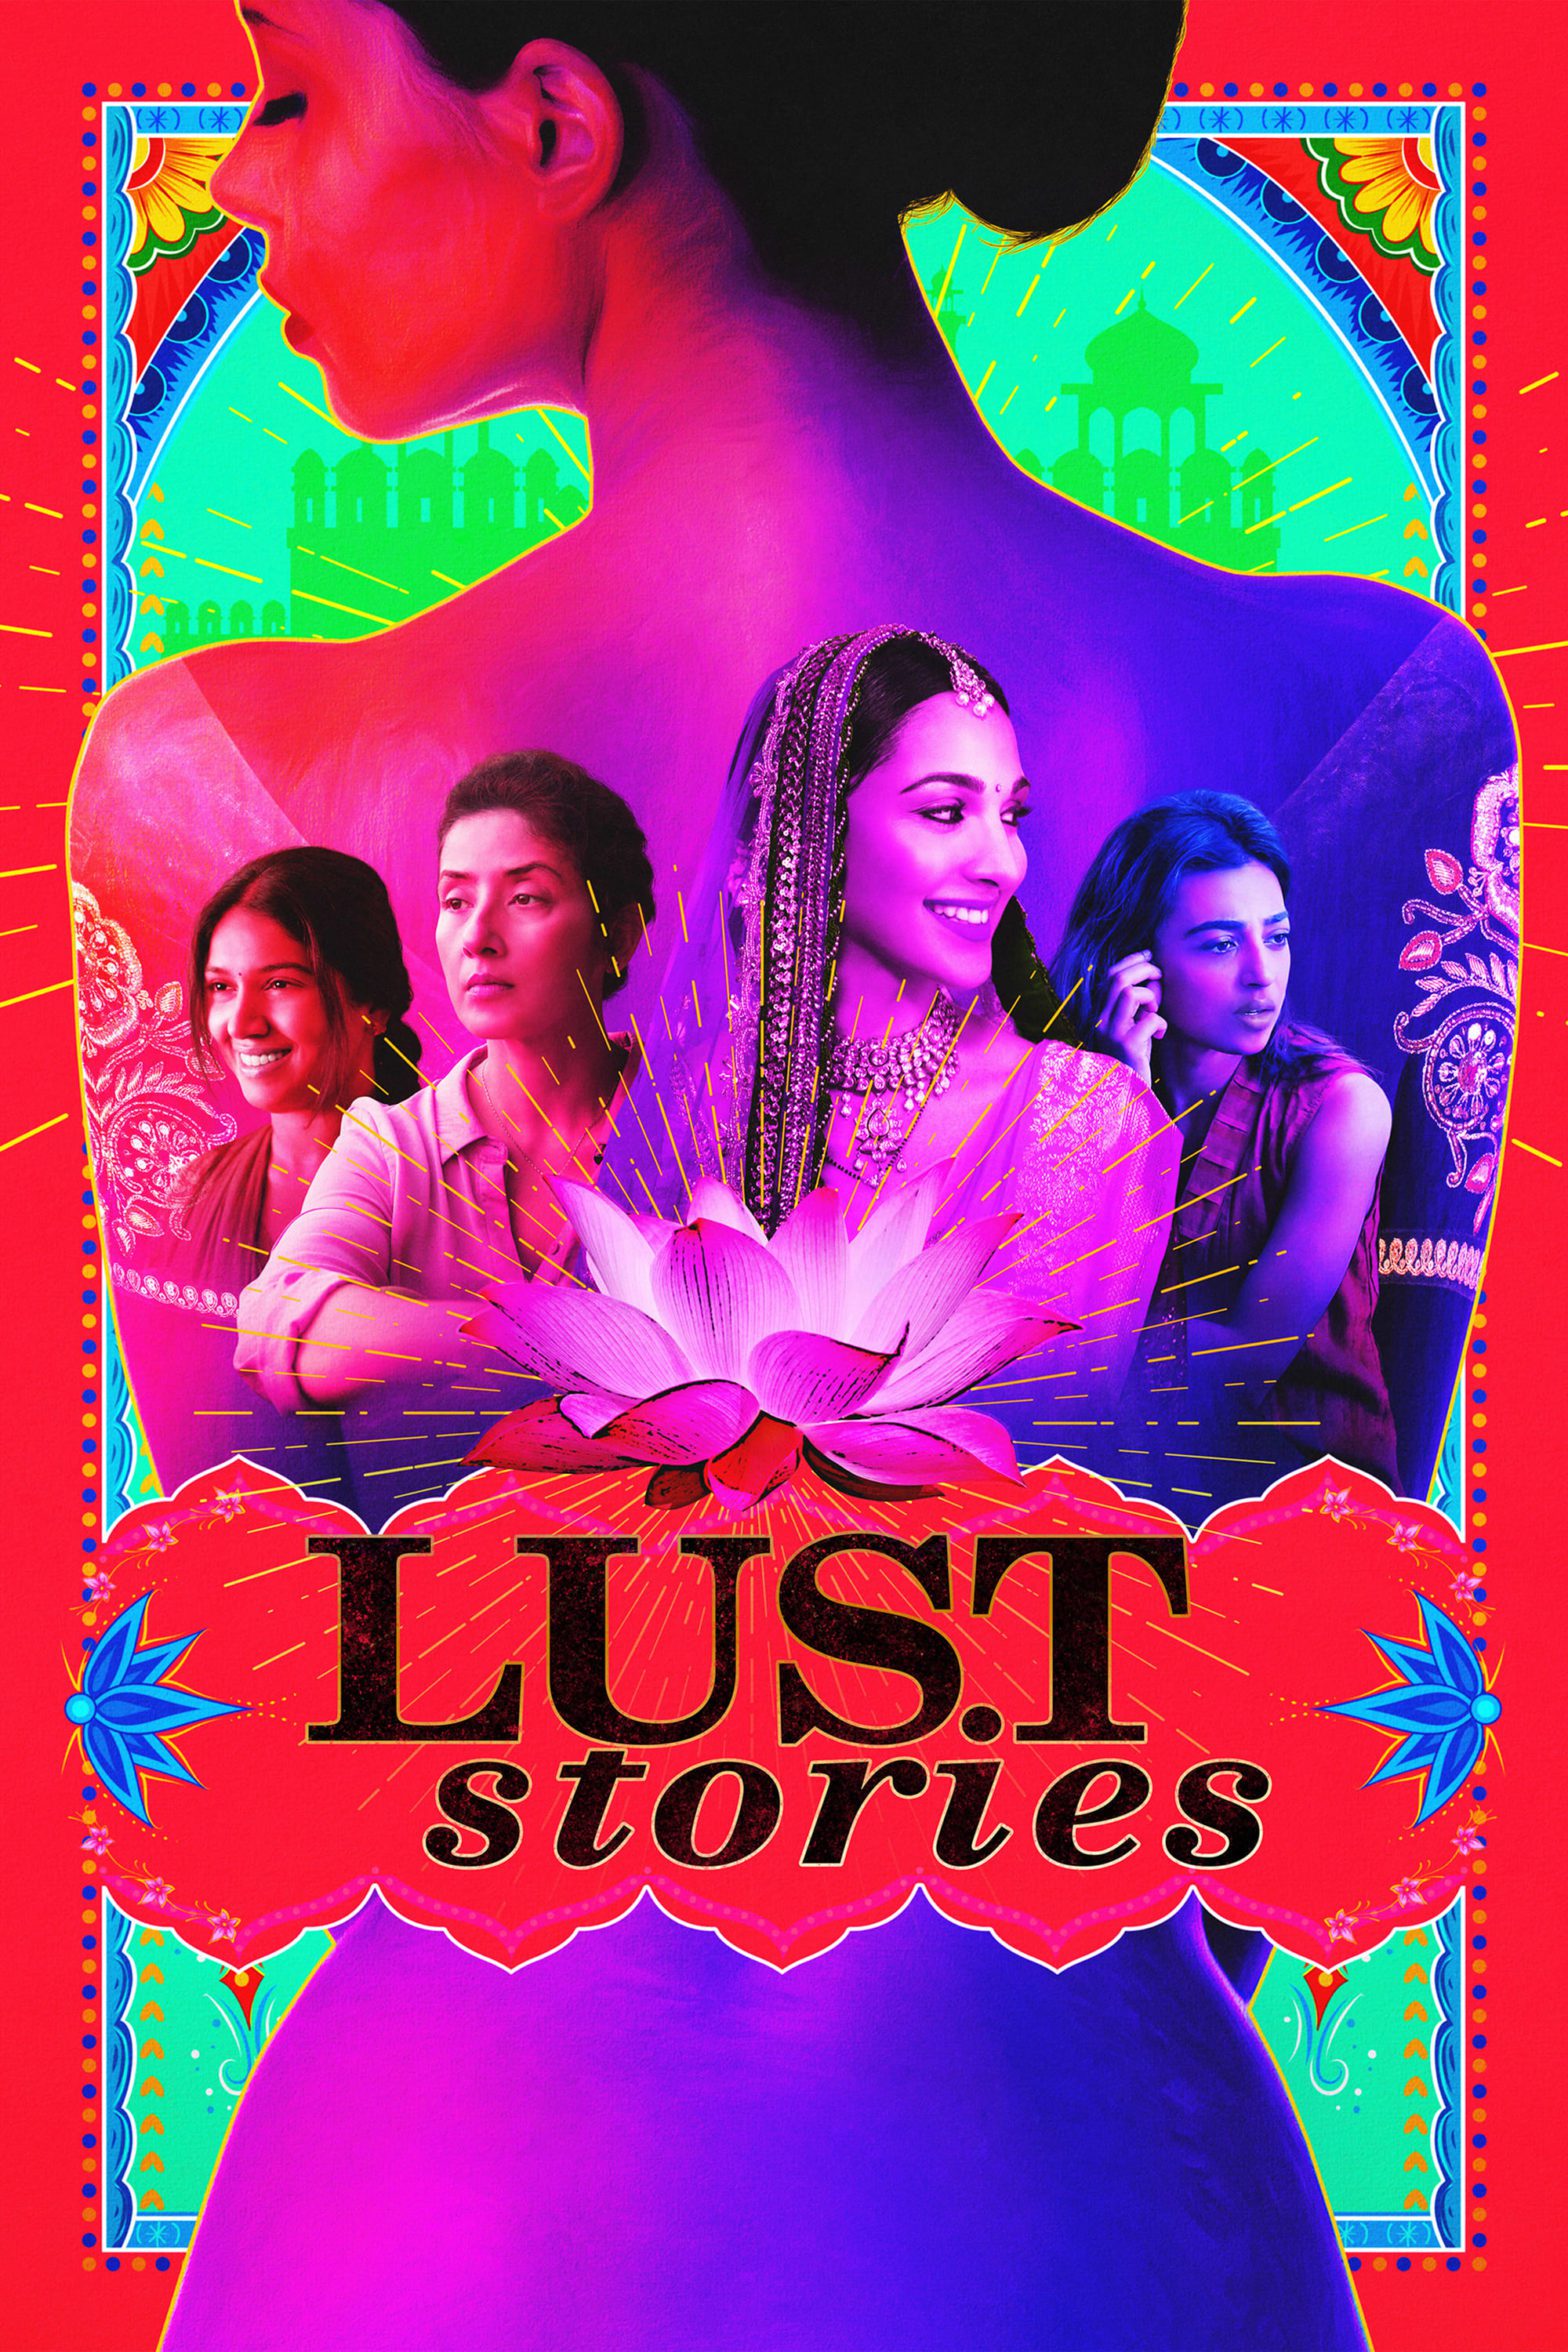 Poster for the movie "Lust Stories"